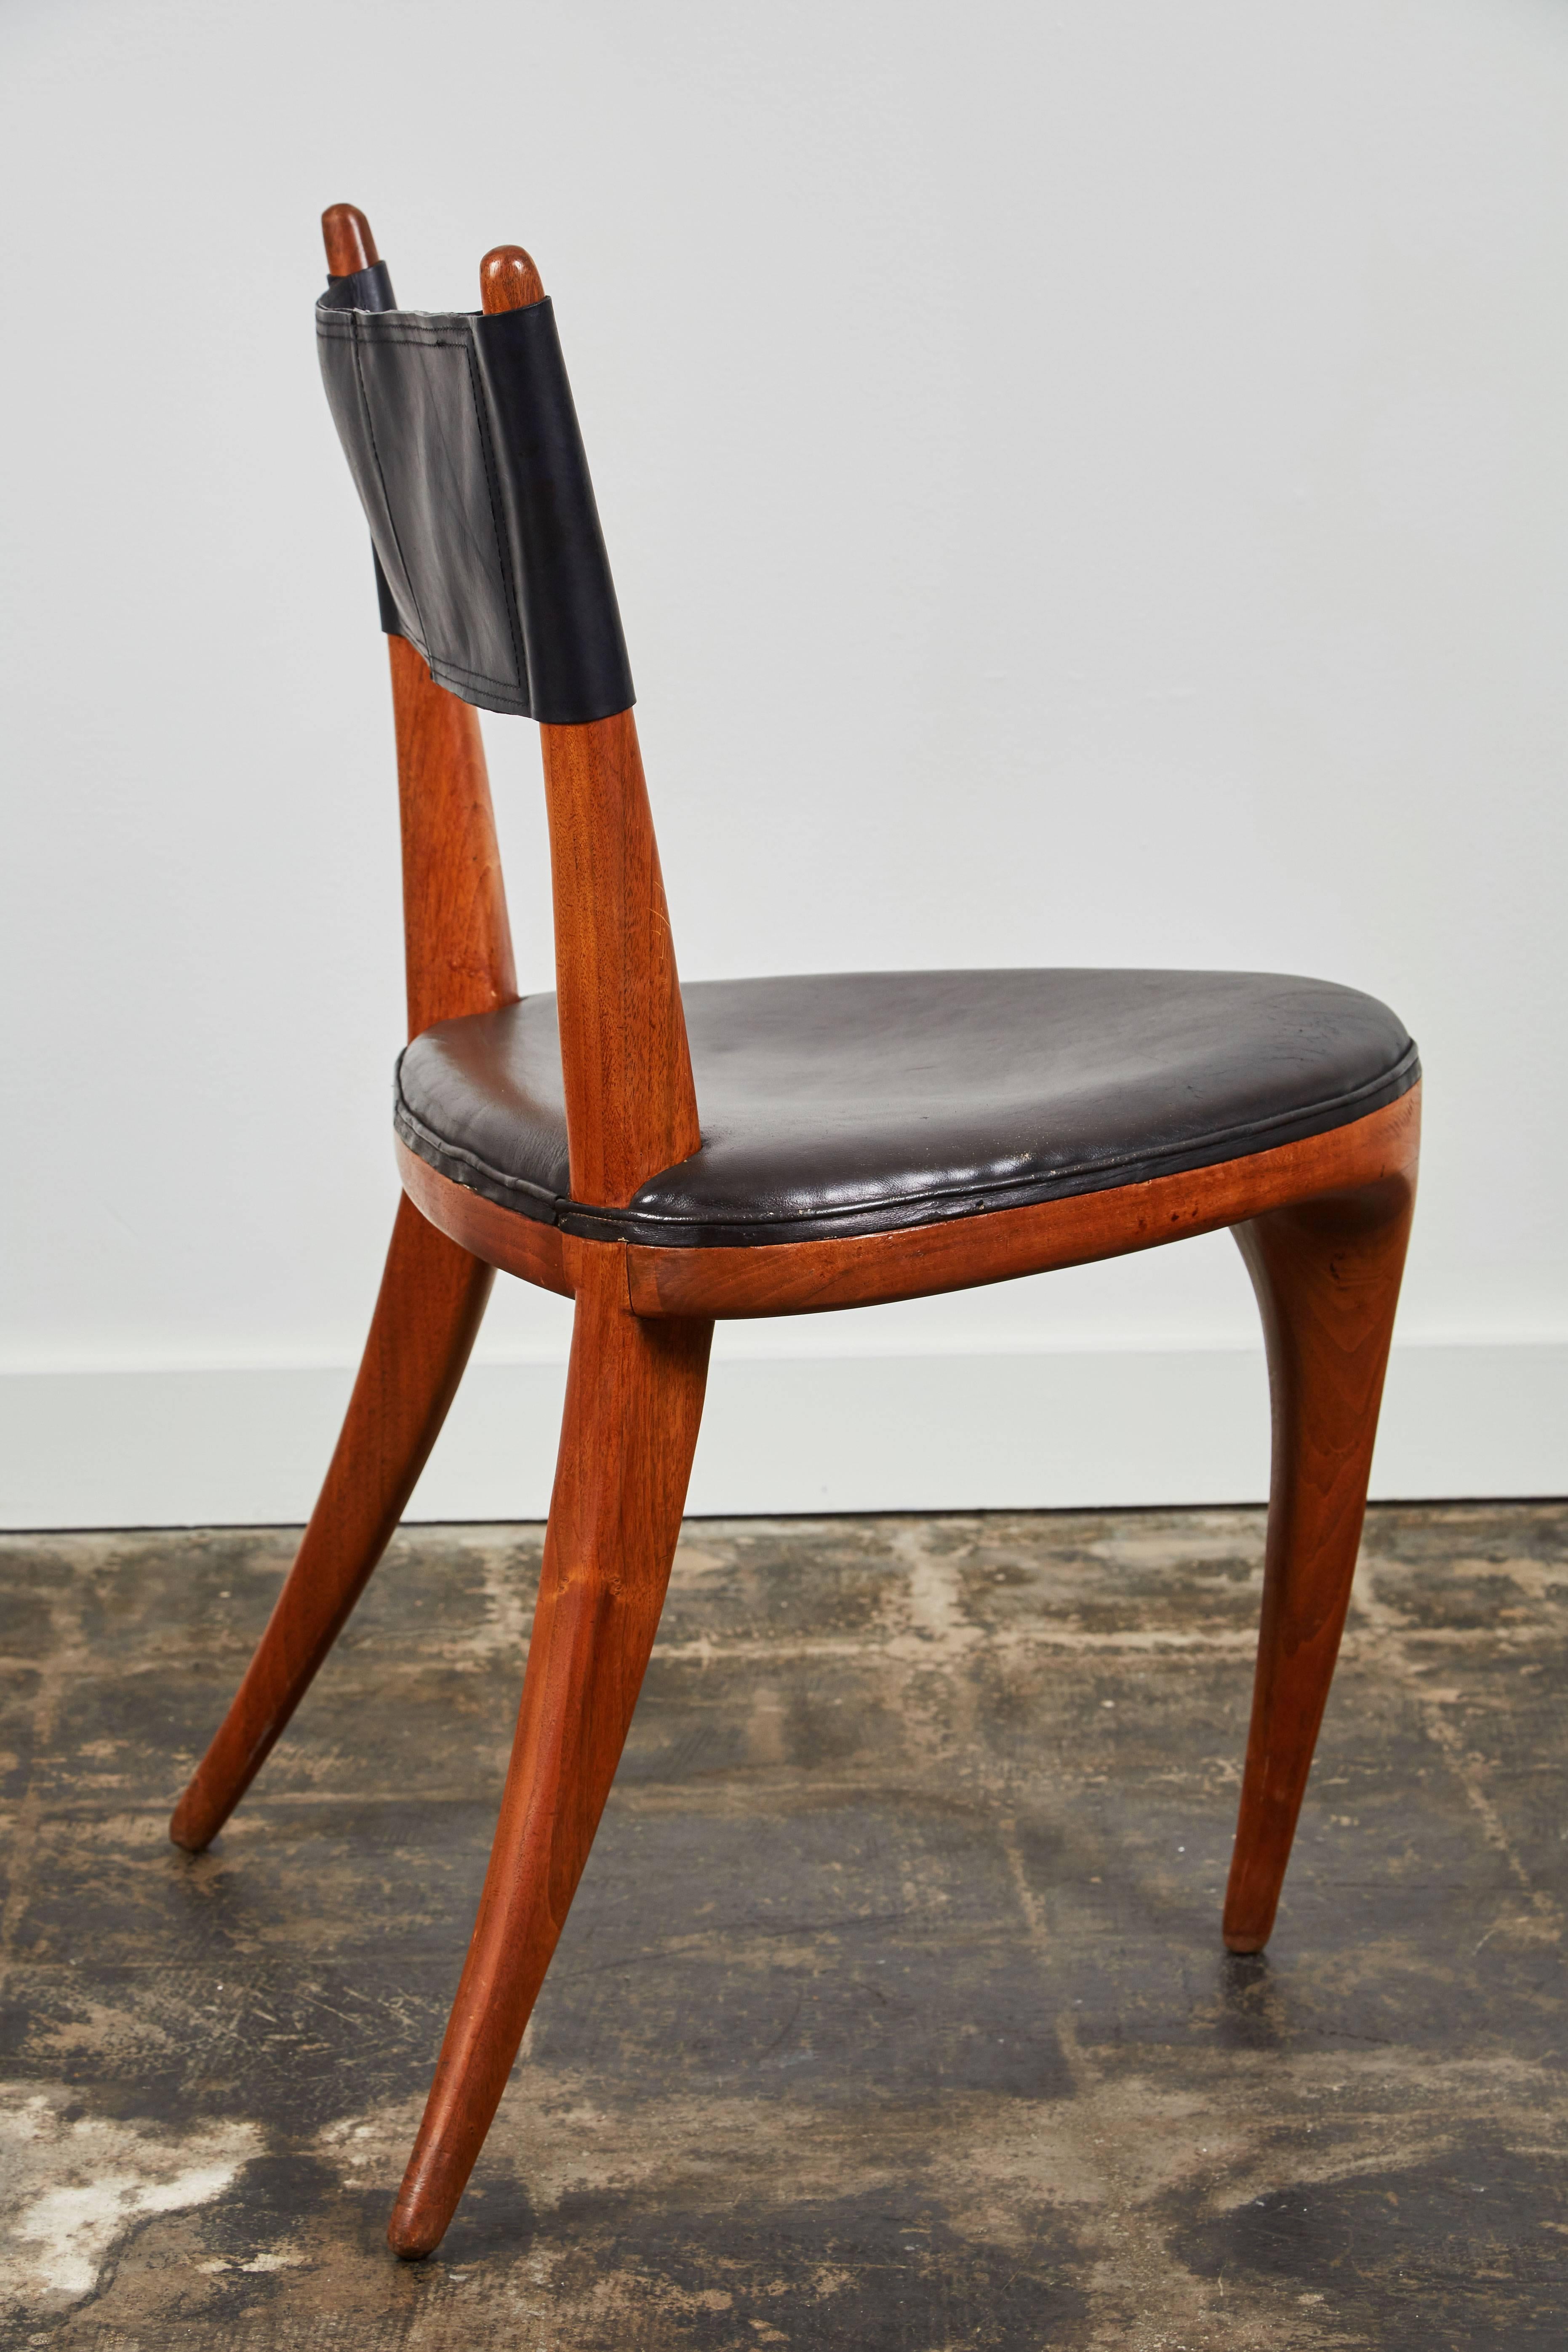 American Handcrafted Tripod Chair by Allen Ditson